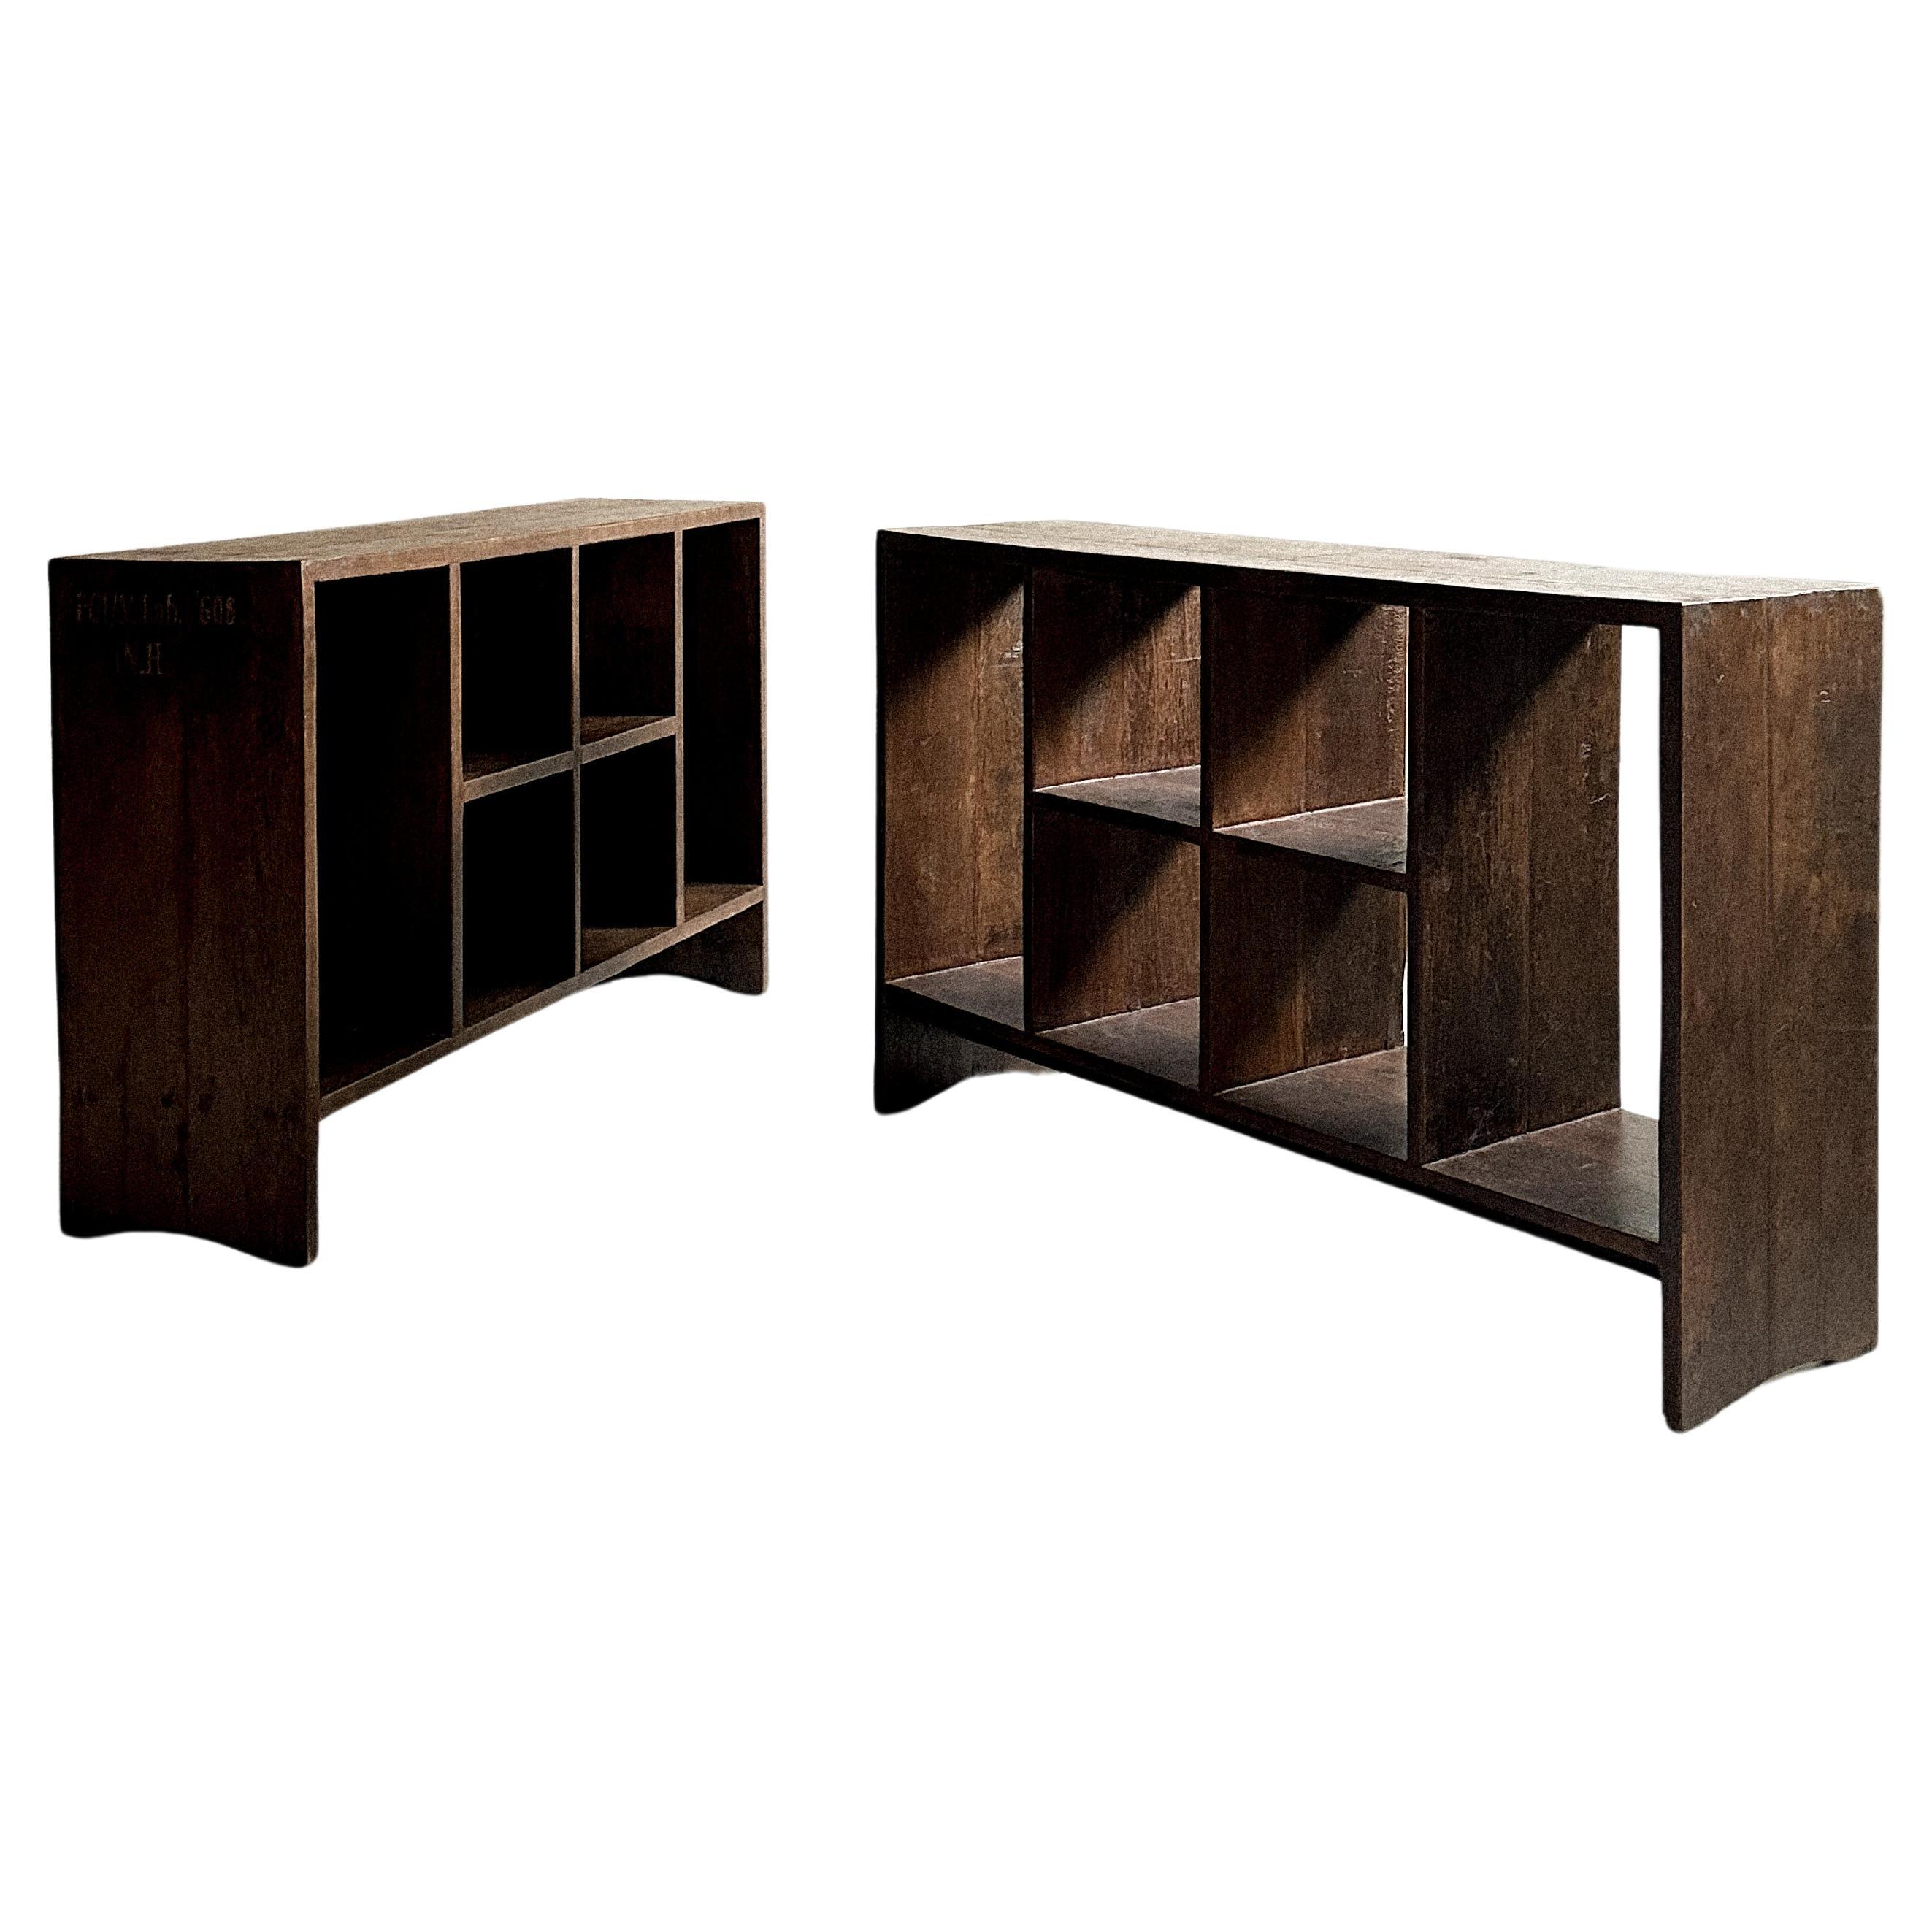 A Pair of Pierre Jeanneret '1896-1967' 'PJ-R-27-A' File Racks, India, 1950s For Sale